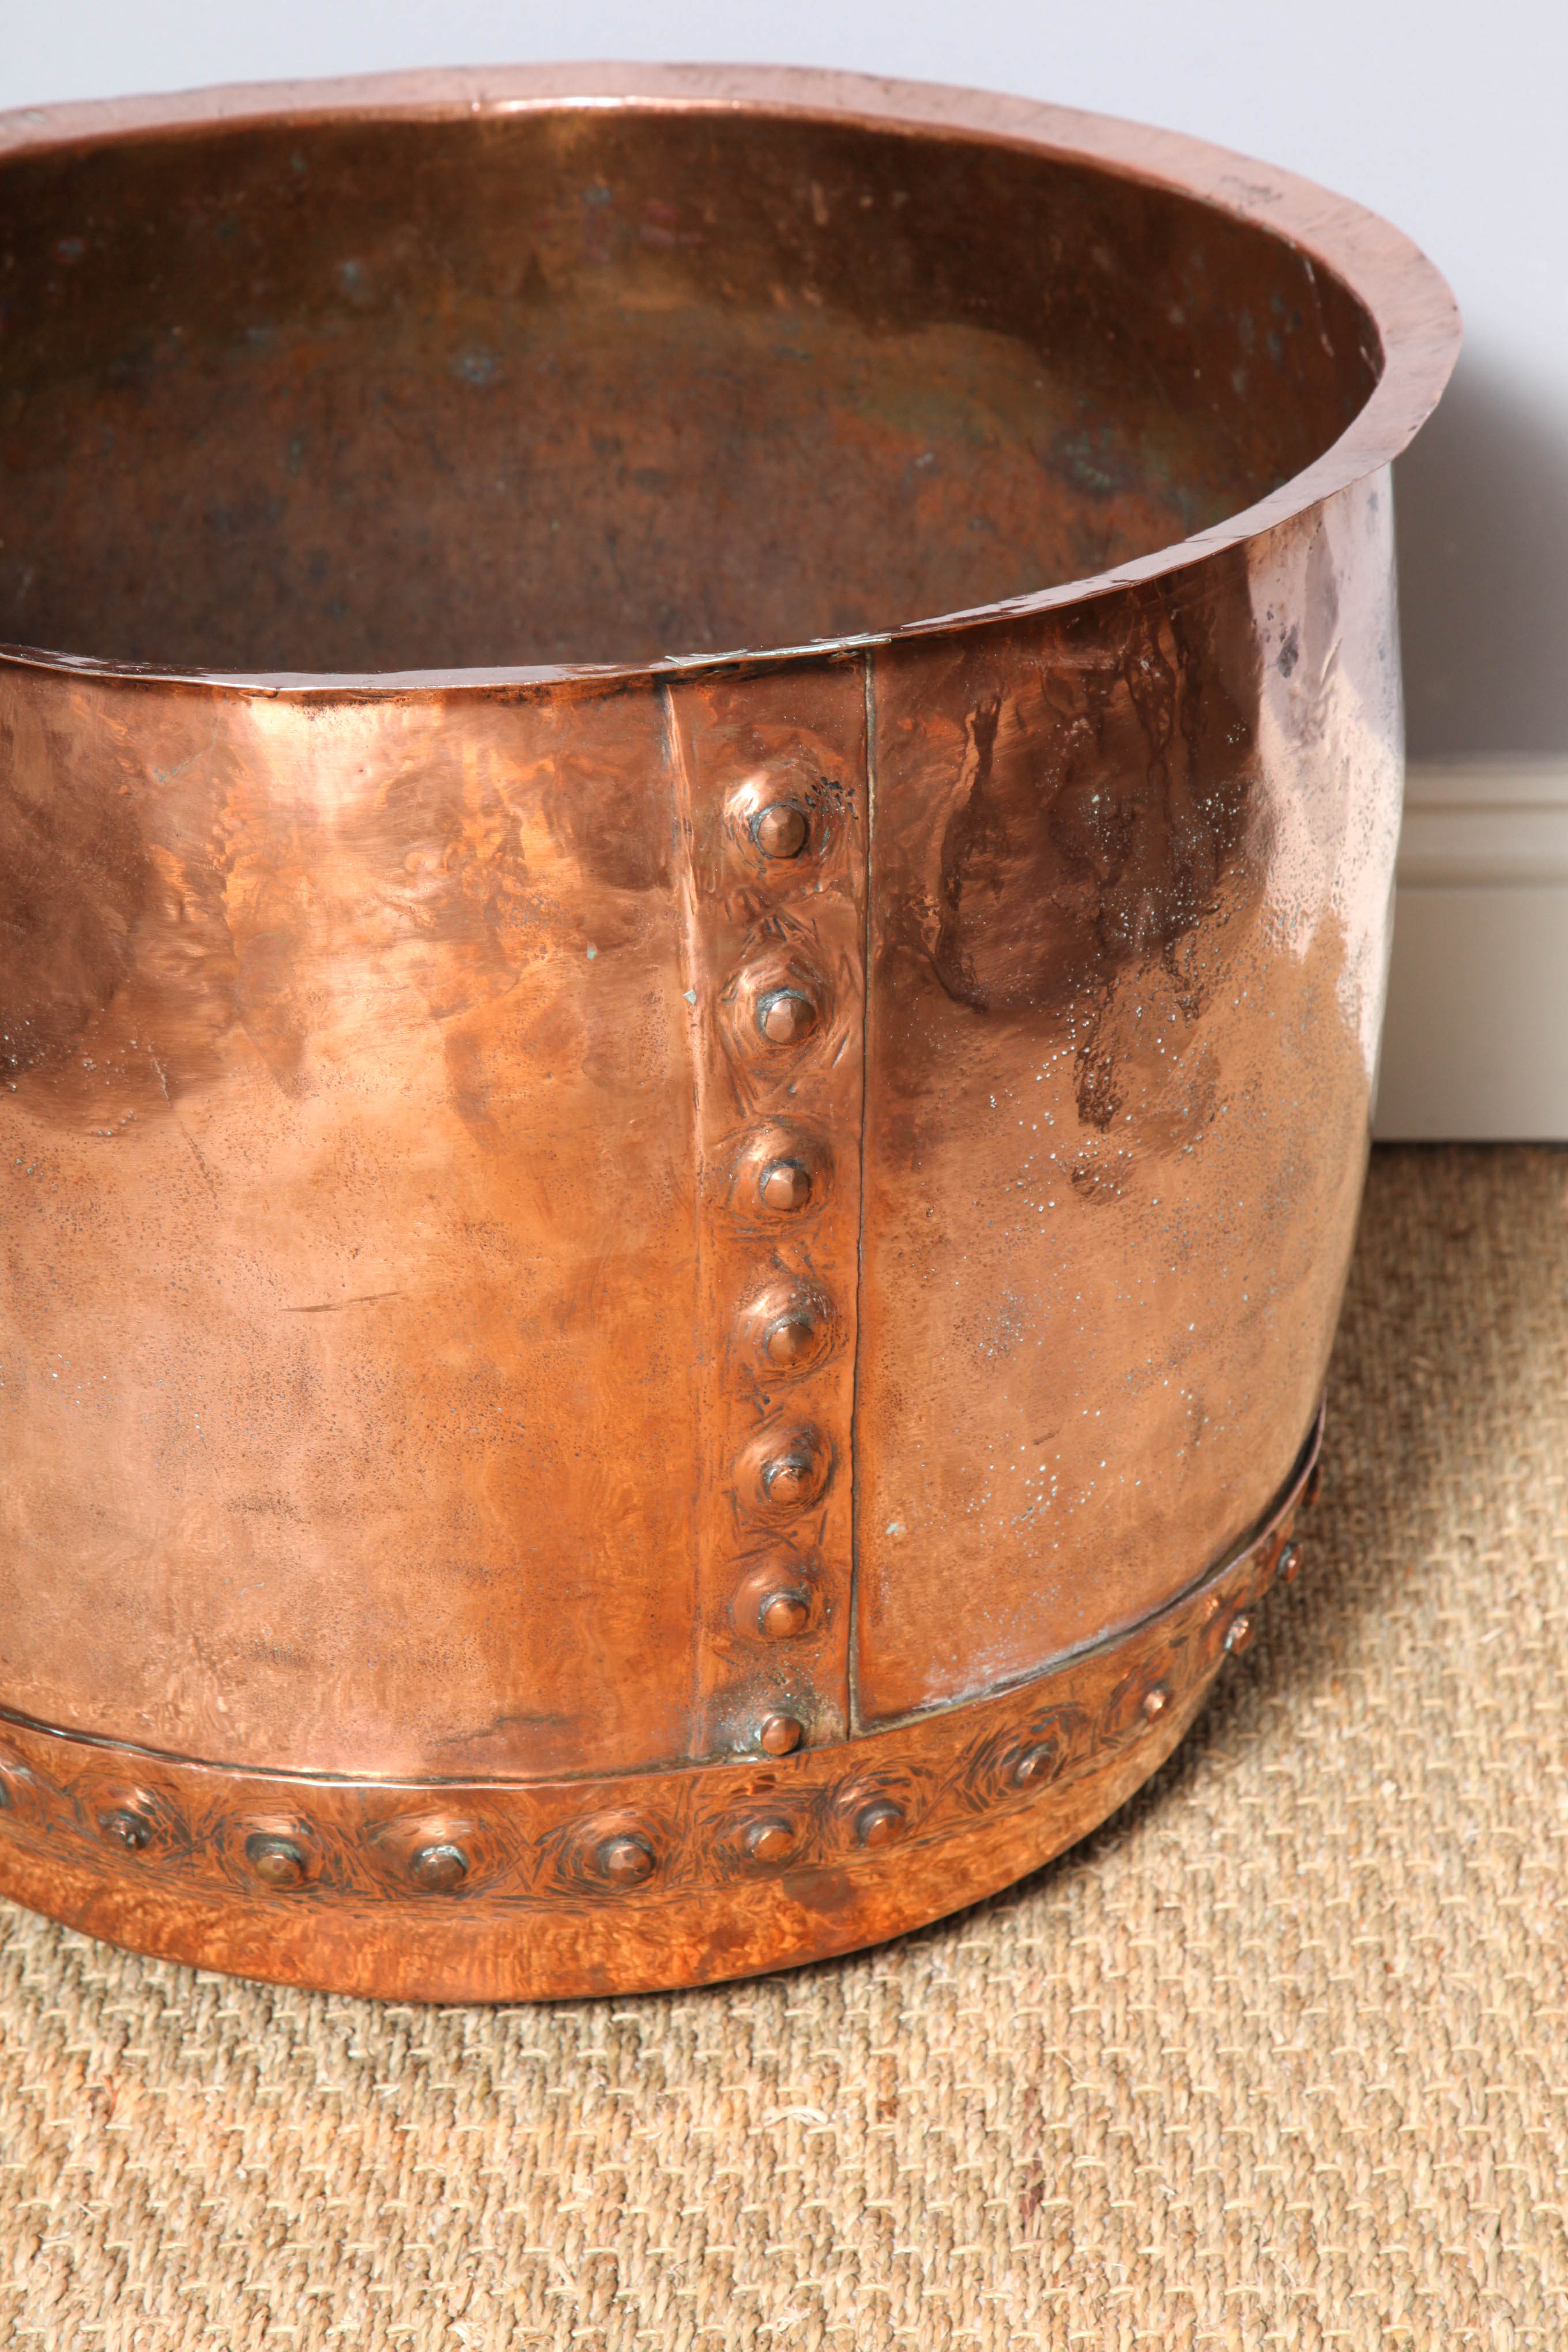 Very good early 19th century English hand riveted copper pot, having flared rim, beaten sides, the nippled rivets with octagonal borders, the copper mellowed to a rosy color.
      
   